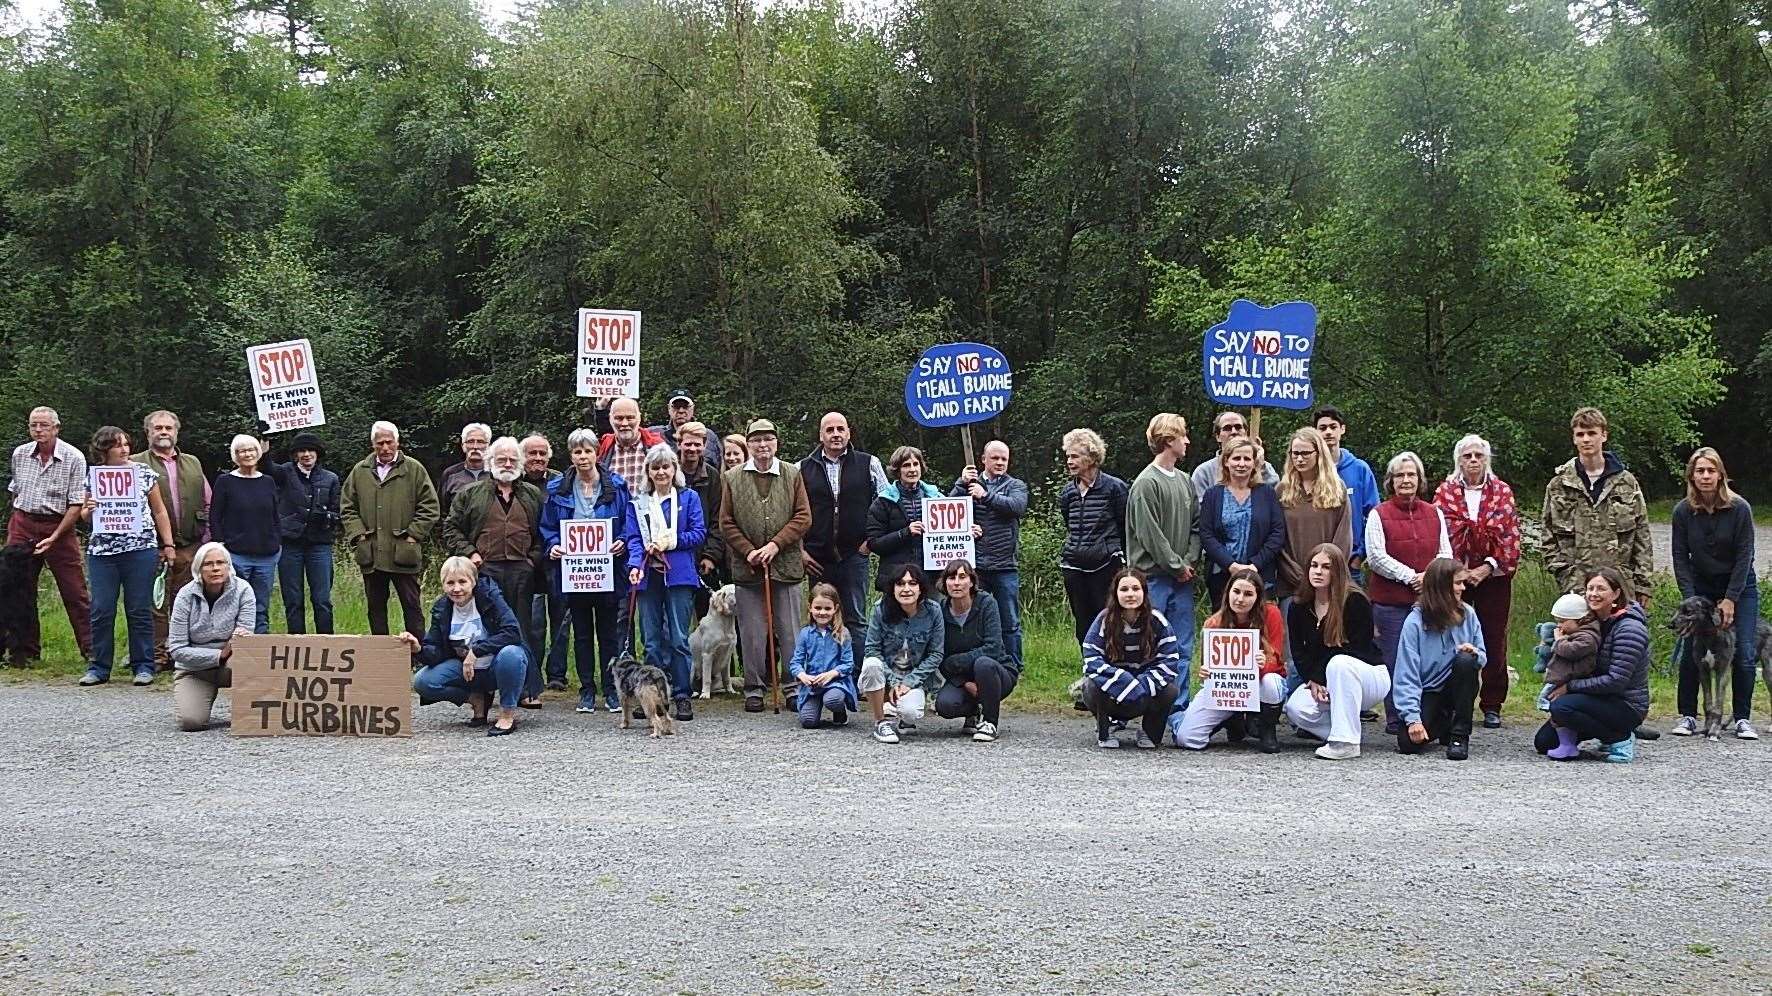 A protest meeting against Meall Buidhe Wind Farm was held at Rosehall Trails before the planning meeting last year.